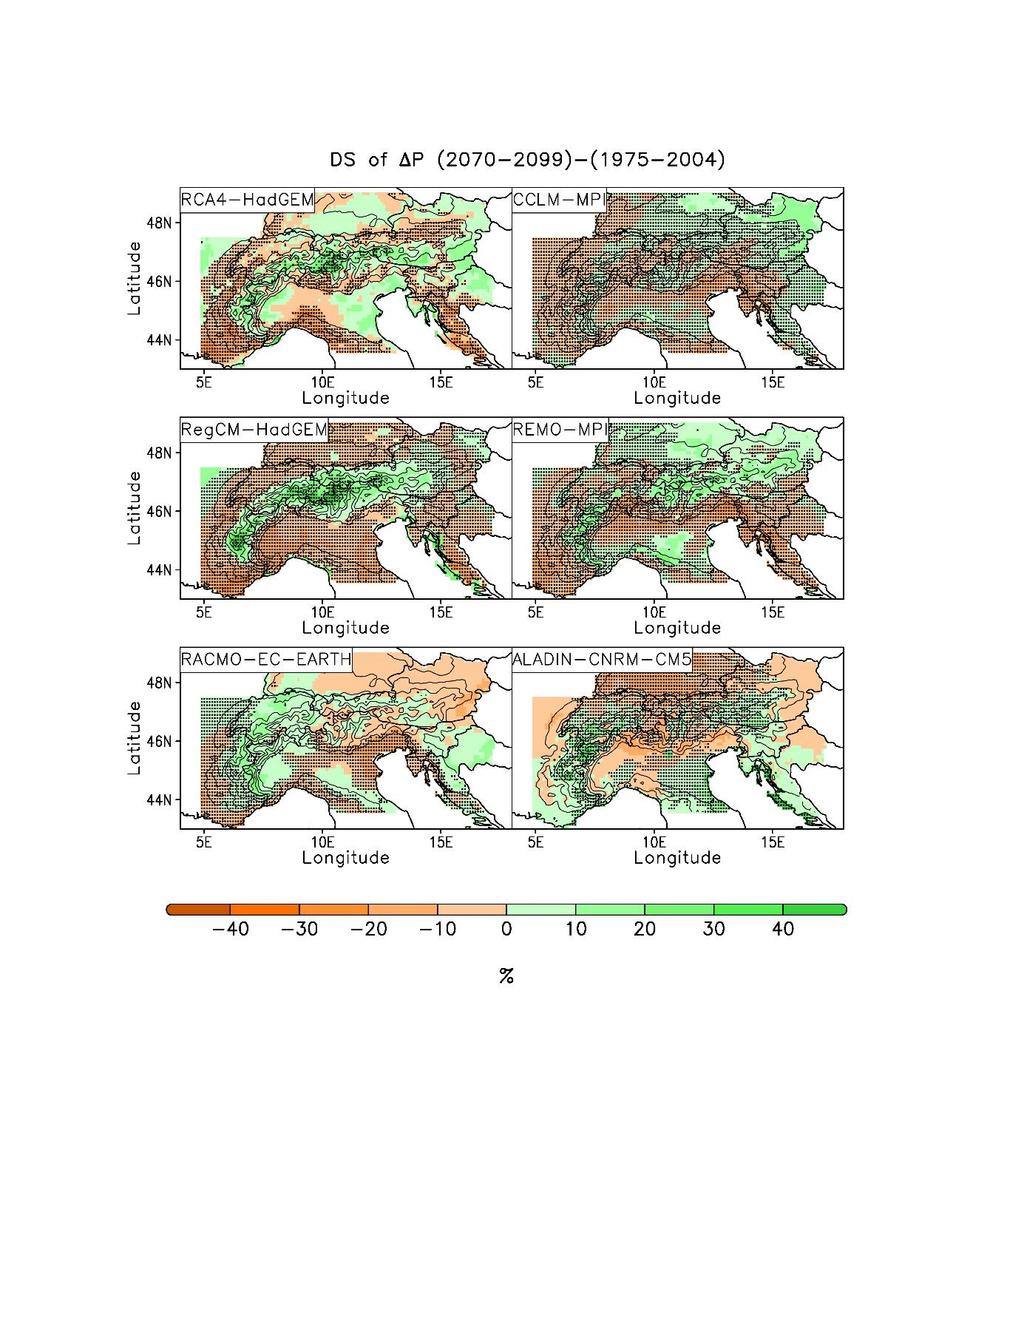 Supplementary Figure 5. Summer precipitation downscaling signal (DS, see text) over the Alpine region for the late century time slice 2070-2099.